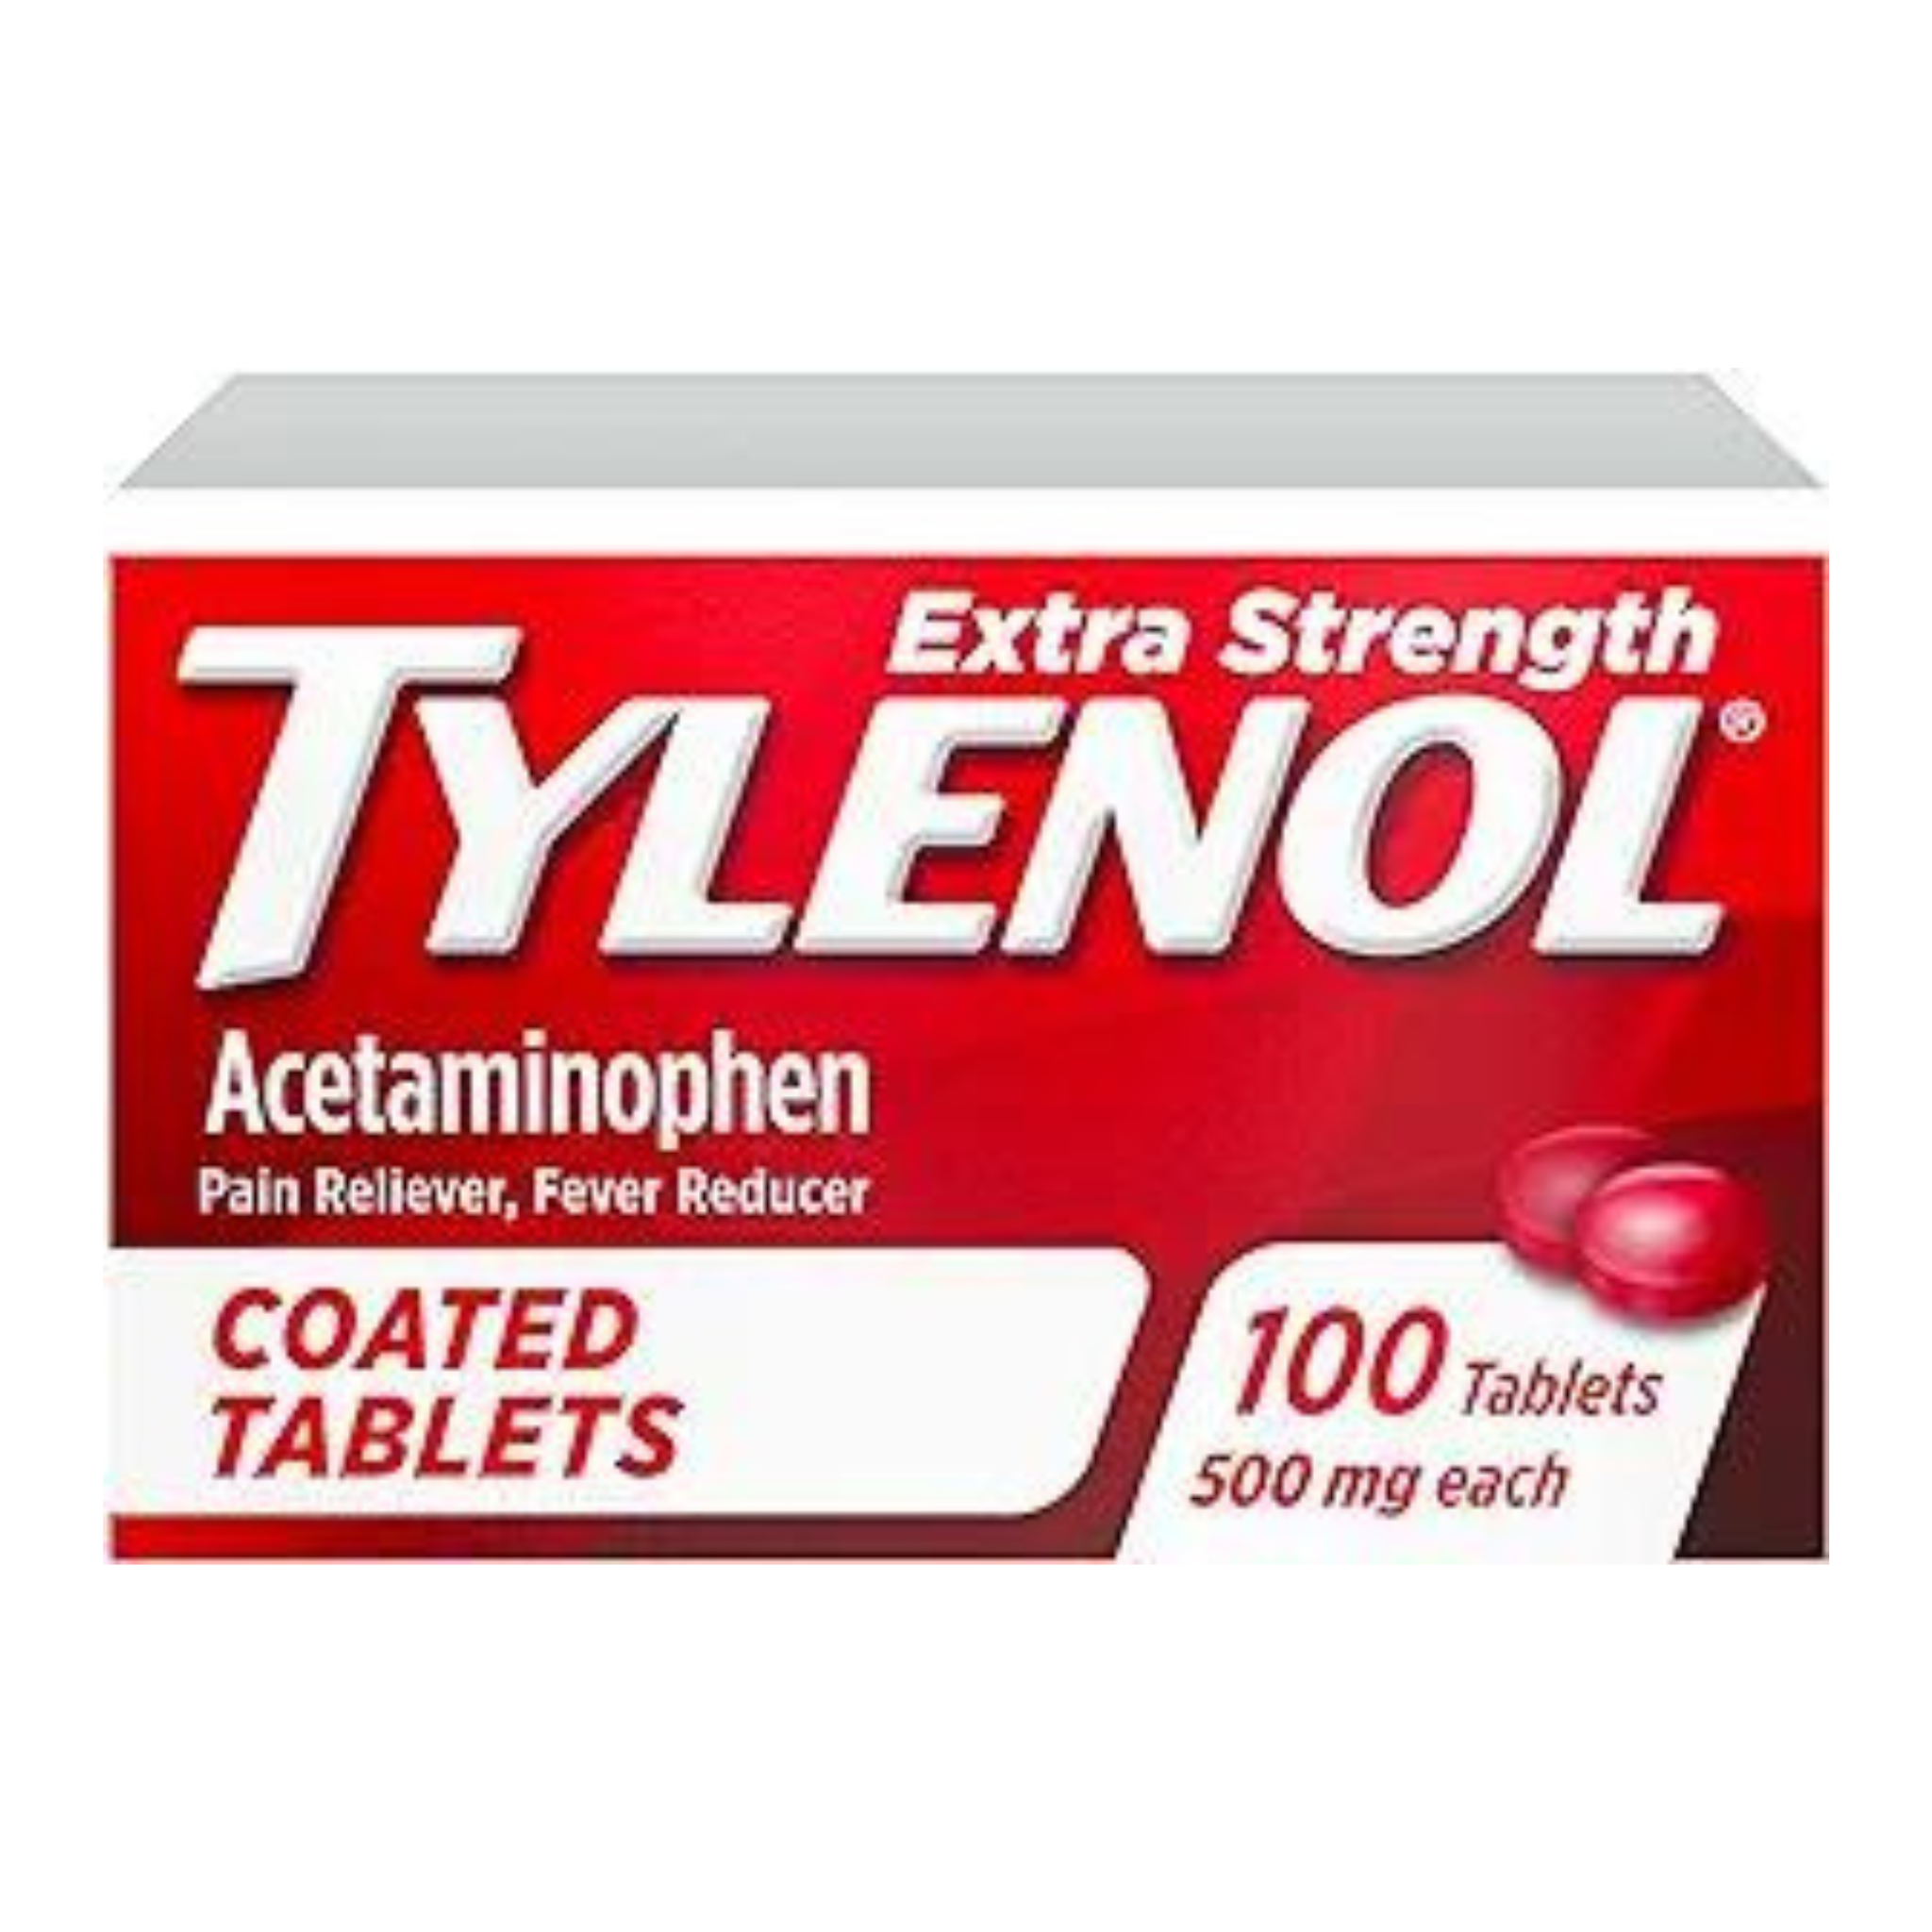 100-Count Tylenol Extra Strength 500mg Acetaminophen Pain Reliever Coated Tablet